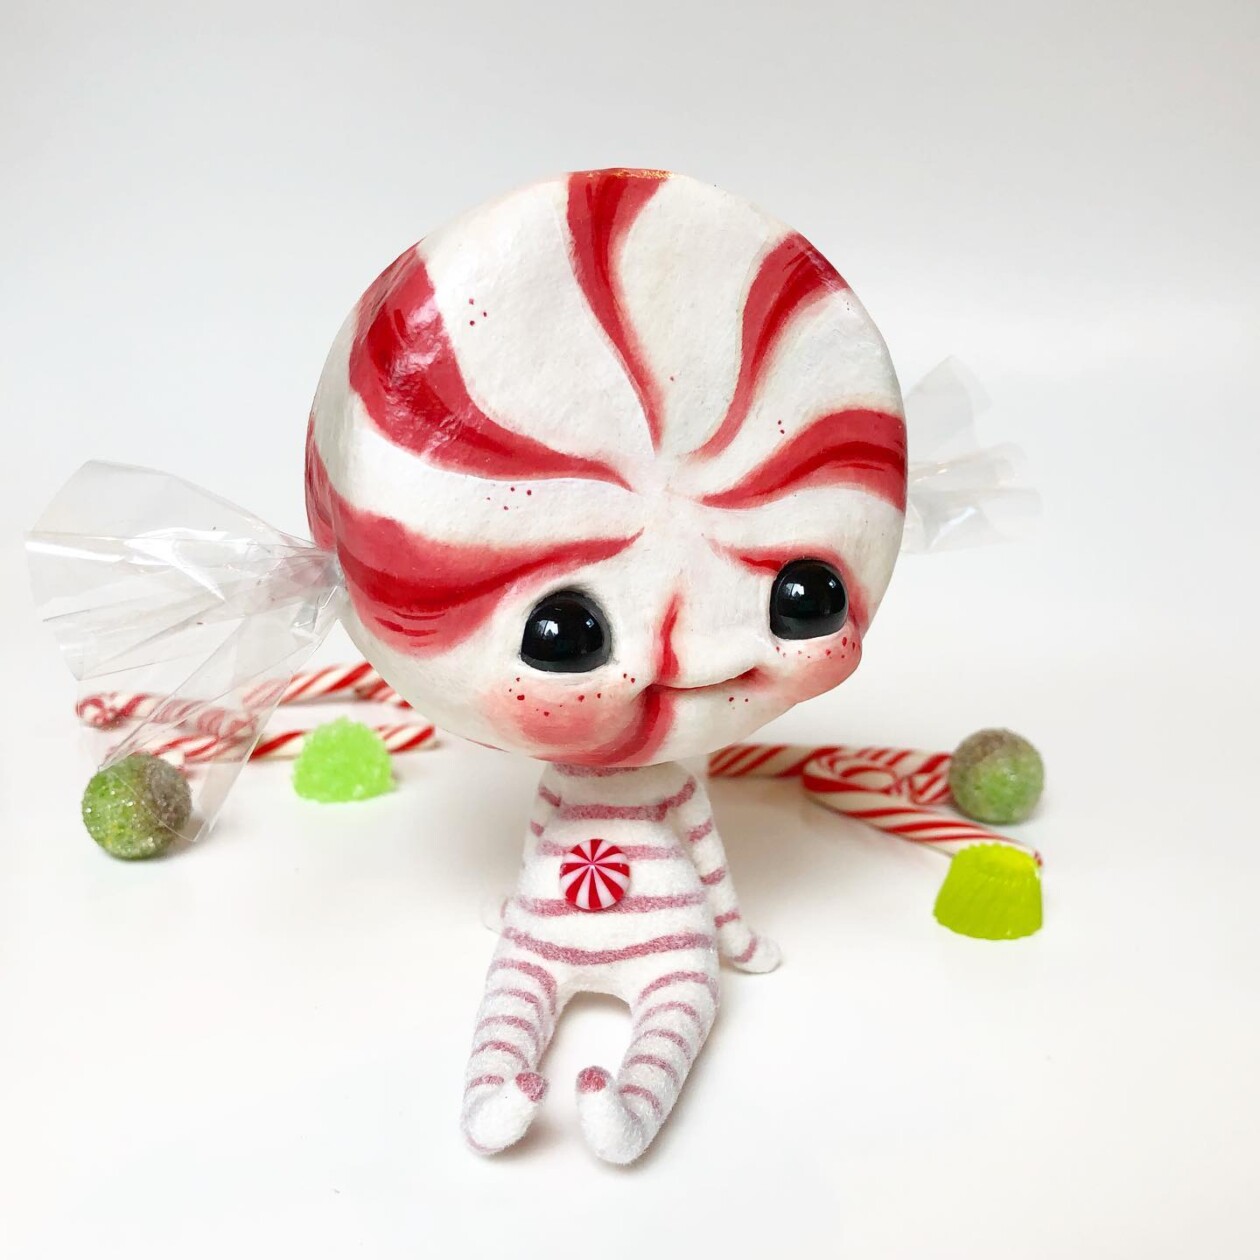 Cute And Creepy Little Monster Toys By Sara Duarte (4)